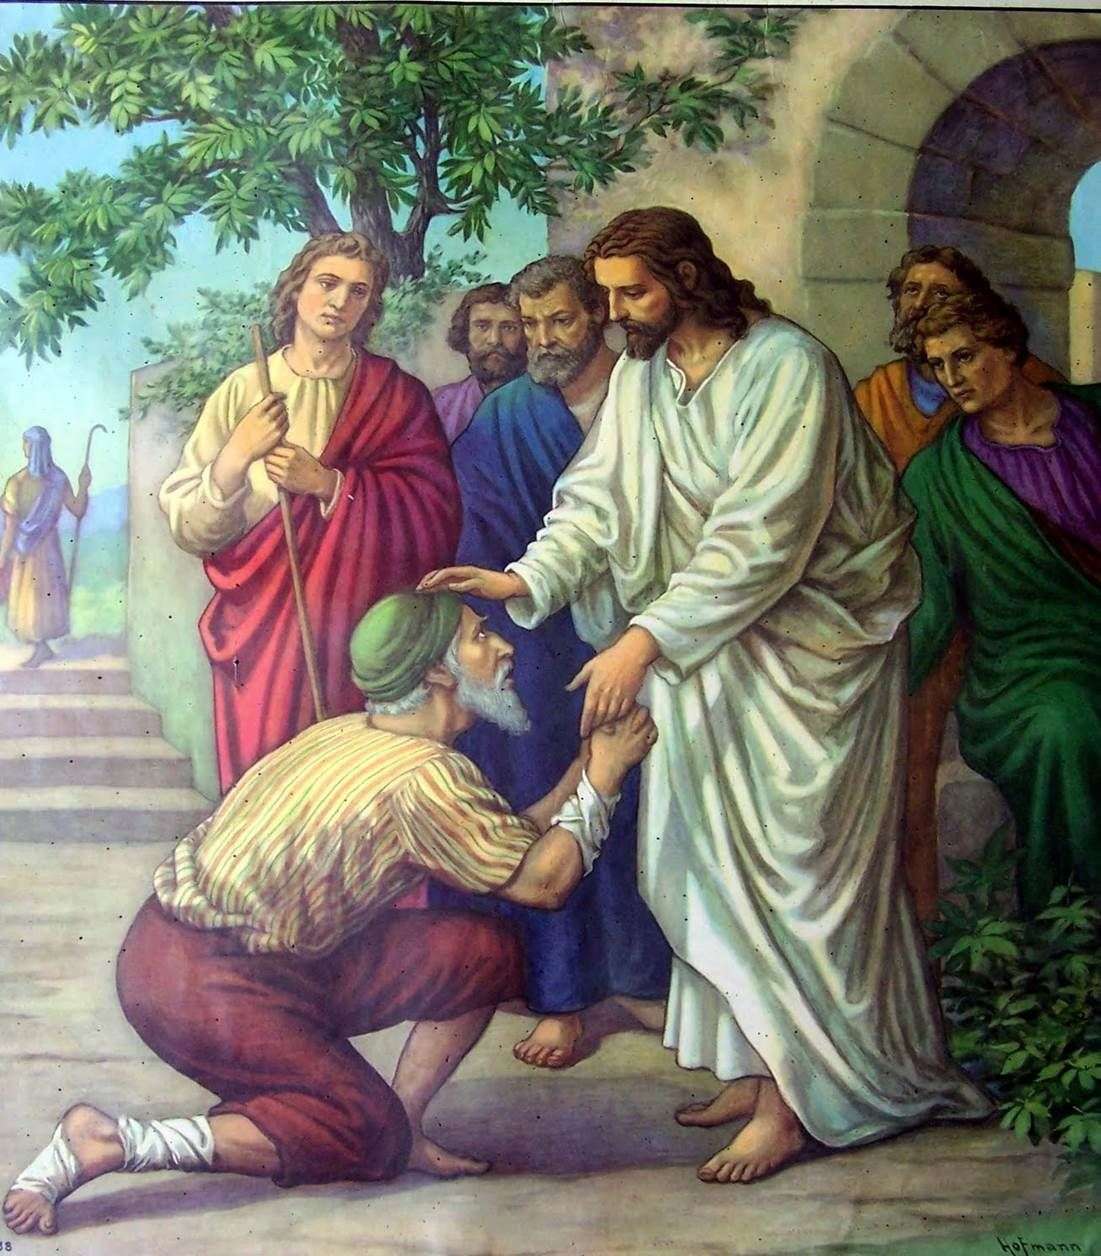 Jesus Heals a Man With Leprosy